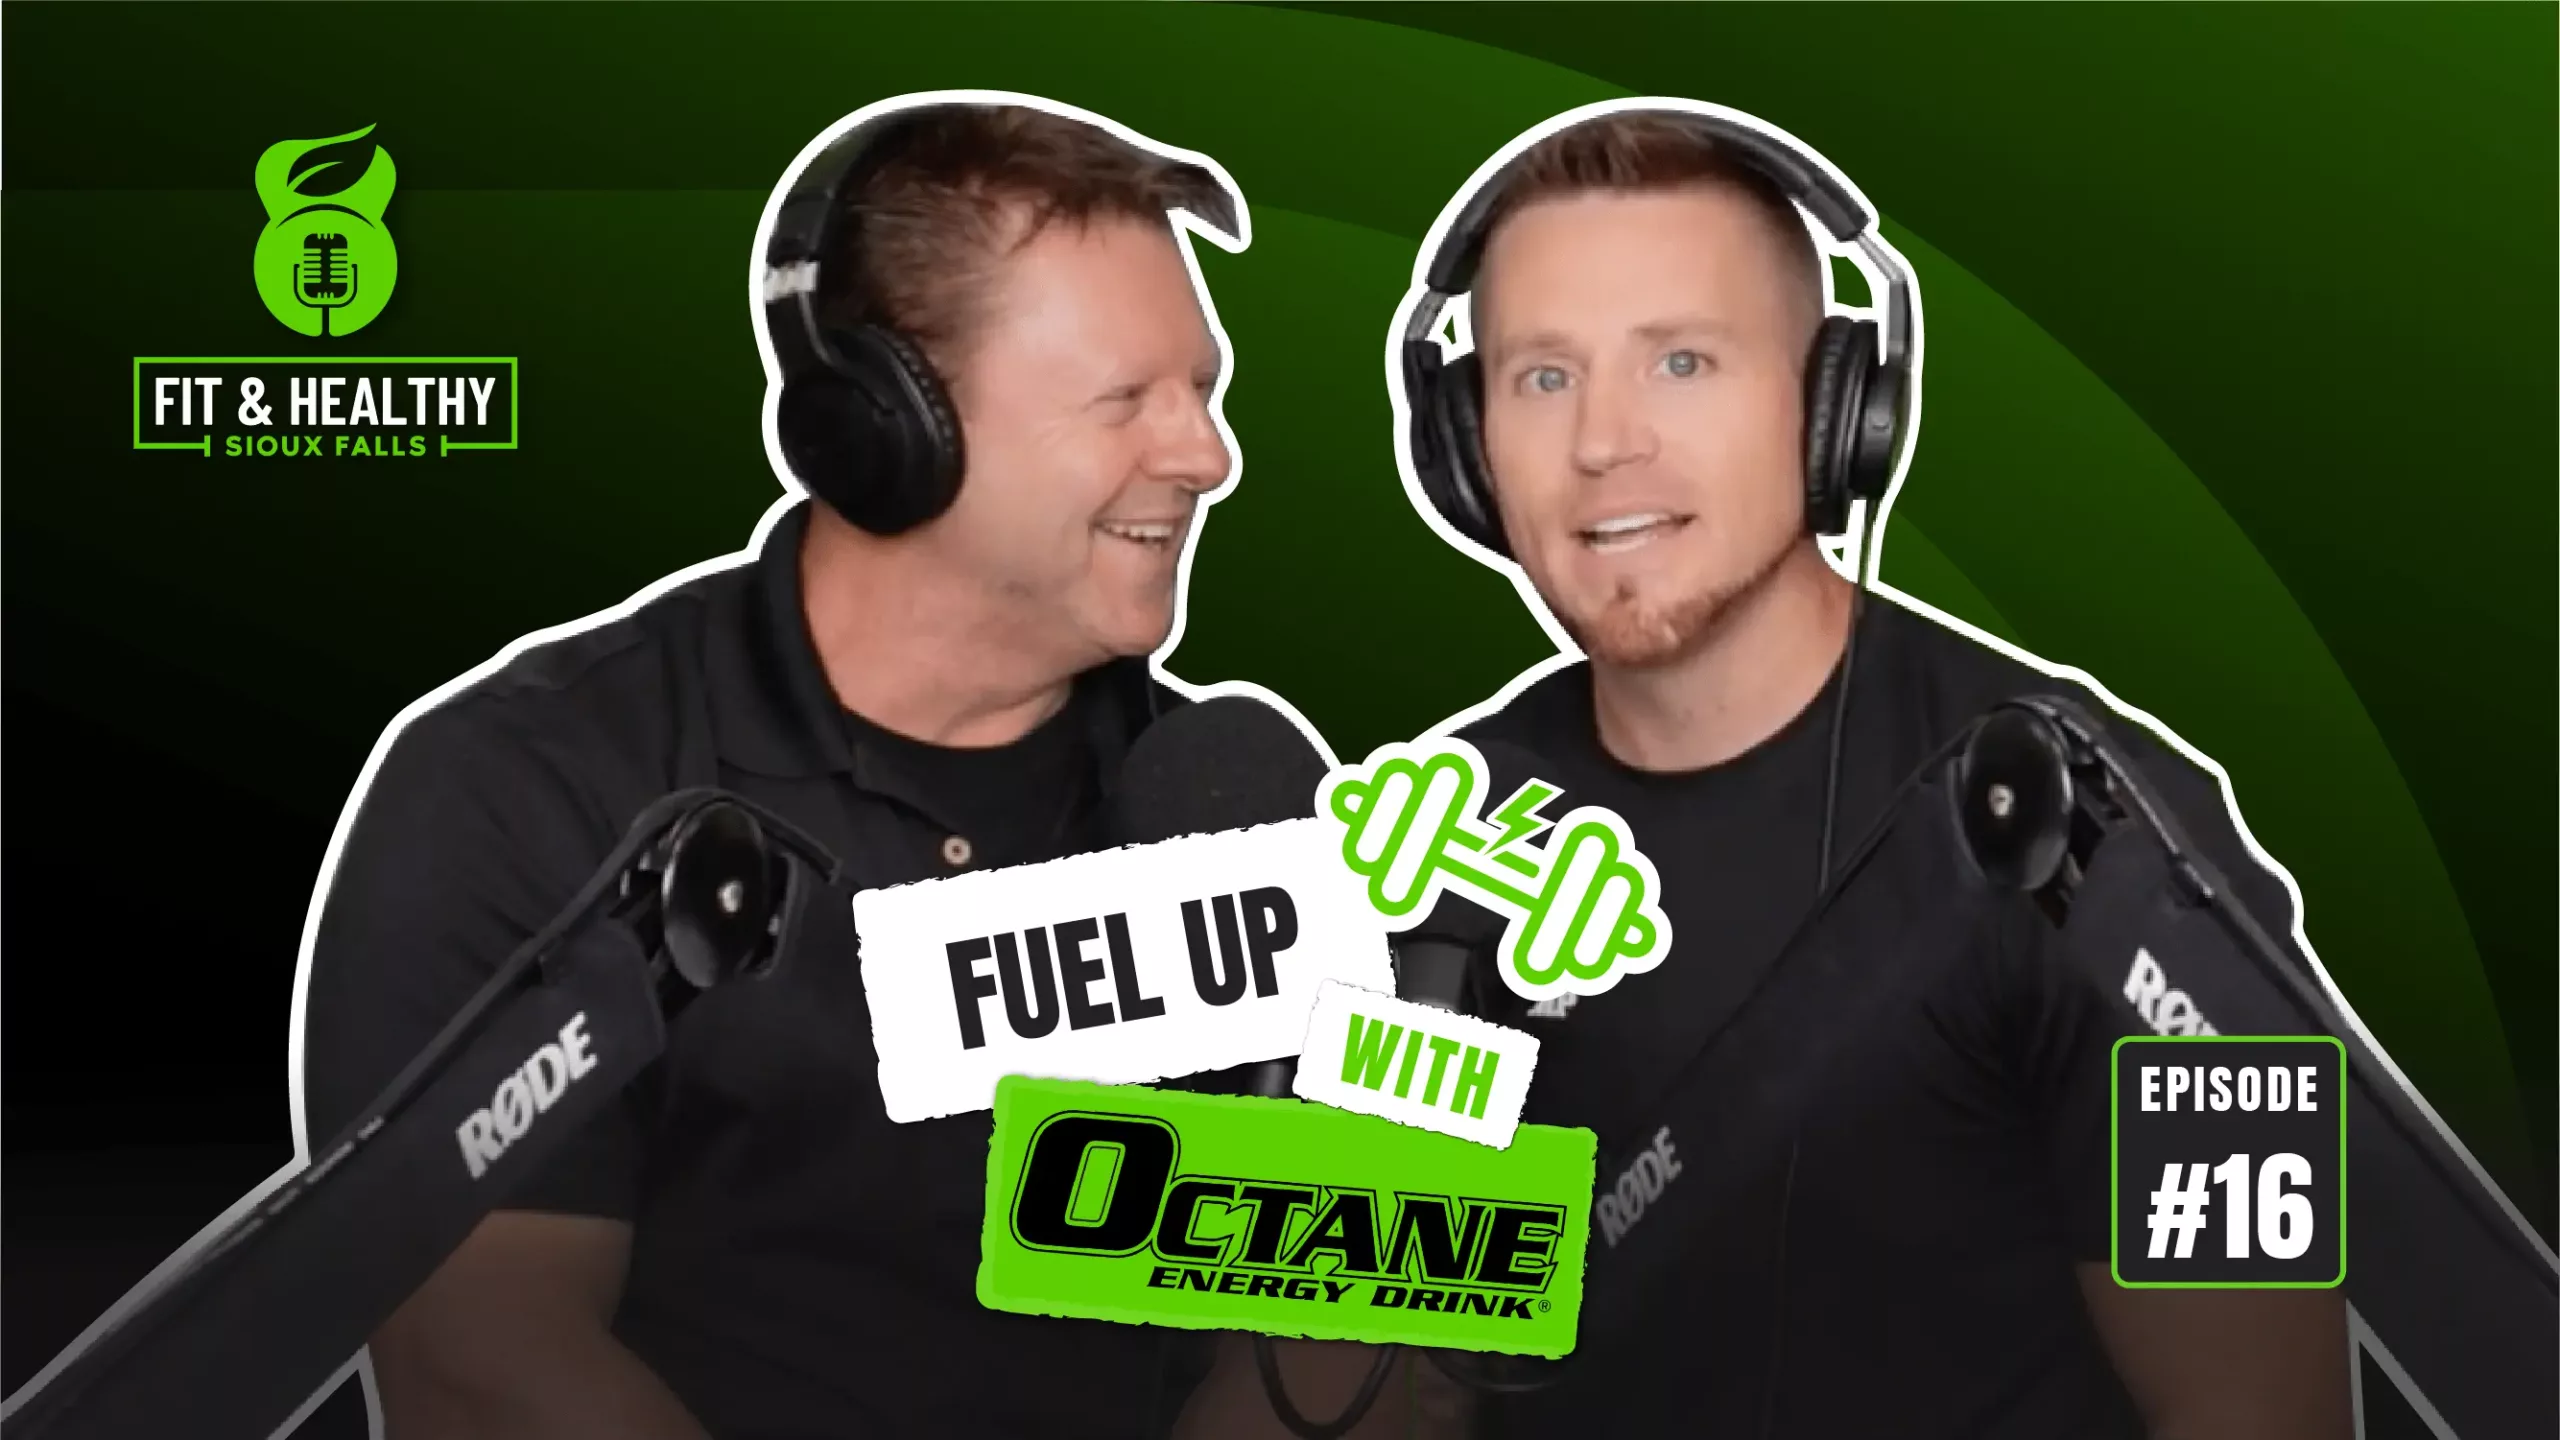 Episode 16: Fuel Up with OCTANE Energy Drink®